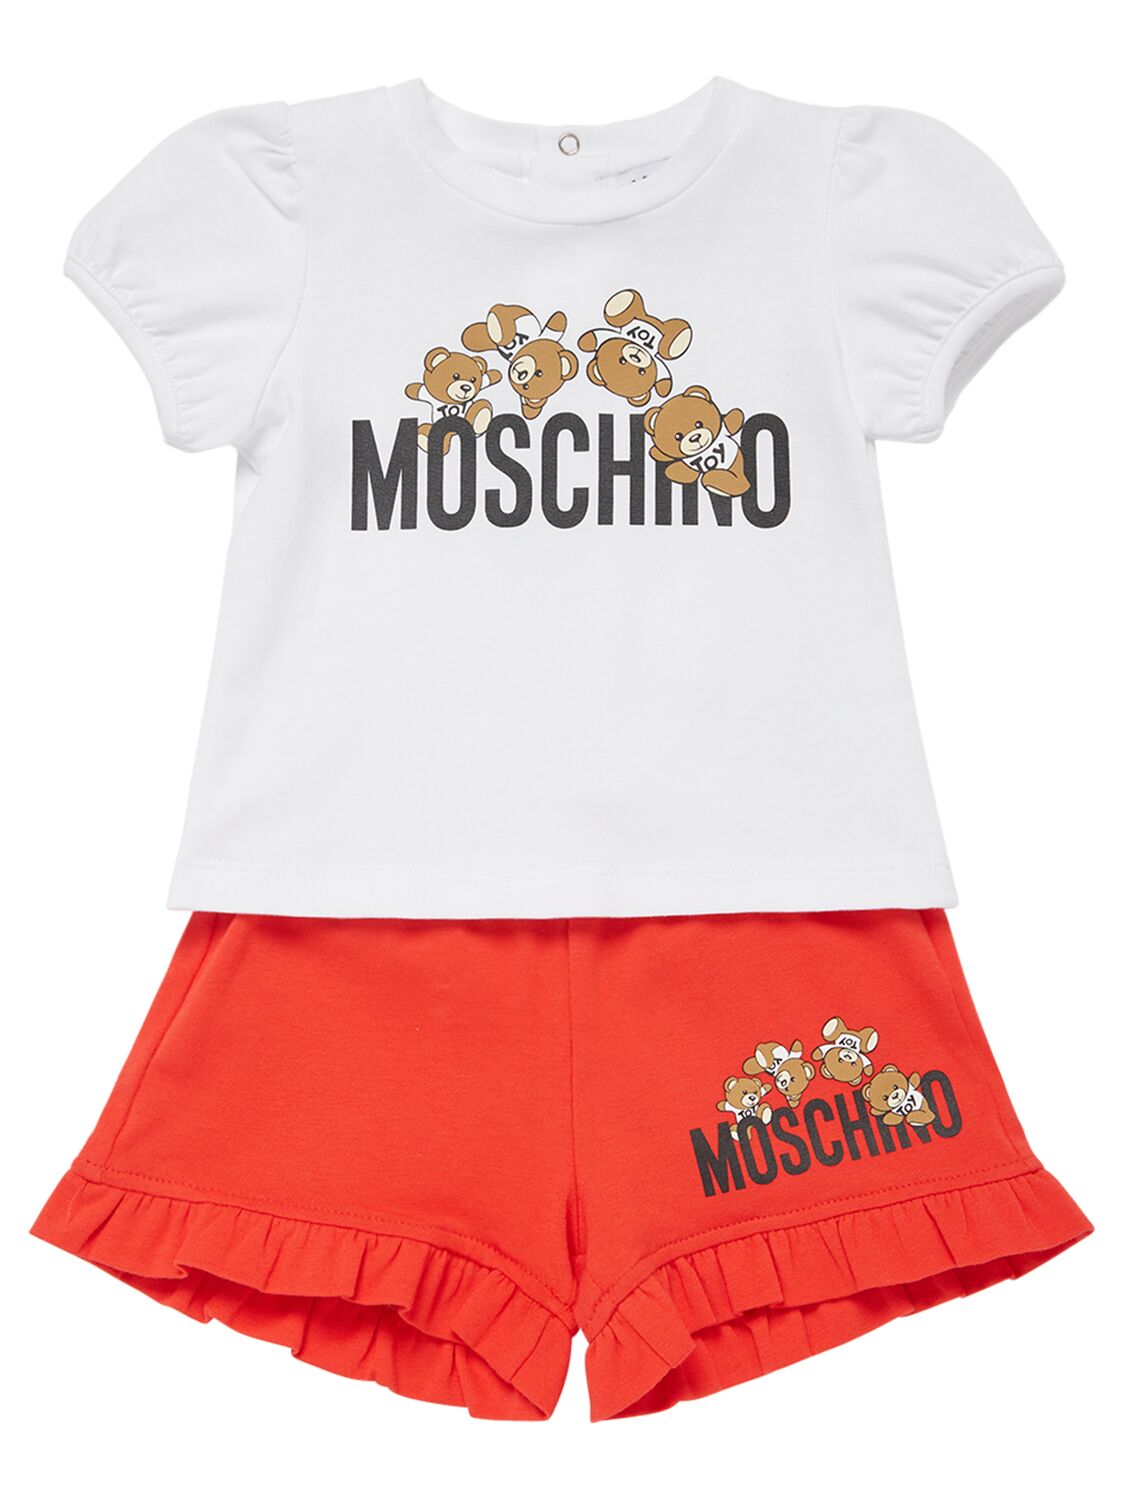 Moschino Kids' Cotton Jersey T-shirt & Shorts In White,red